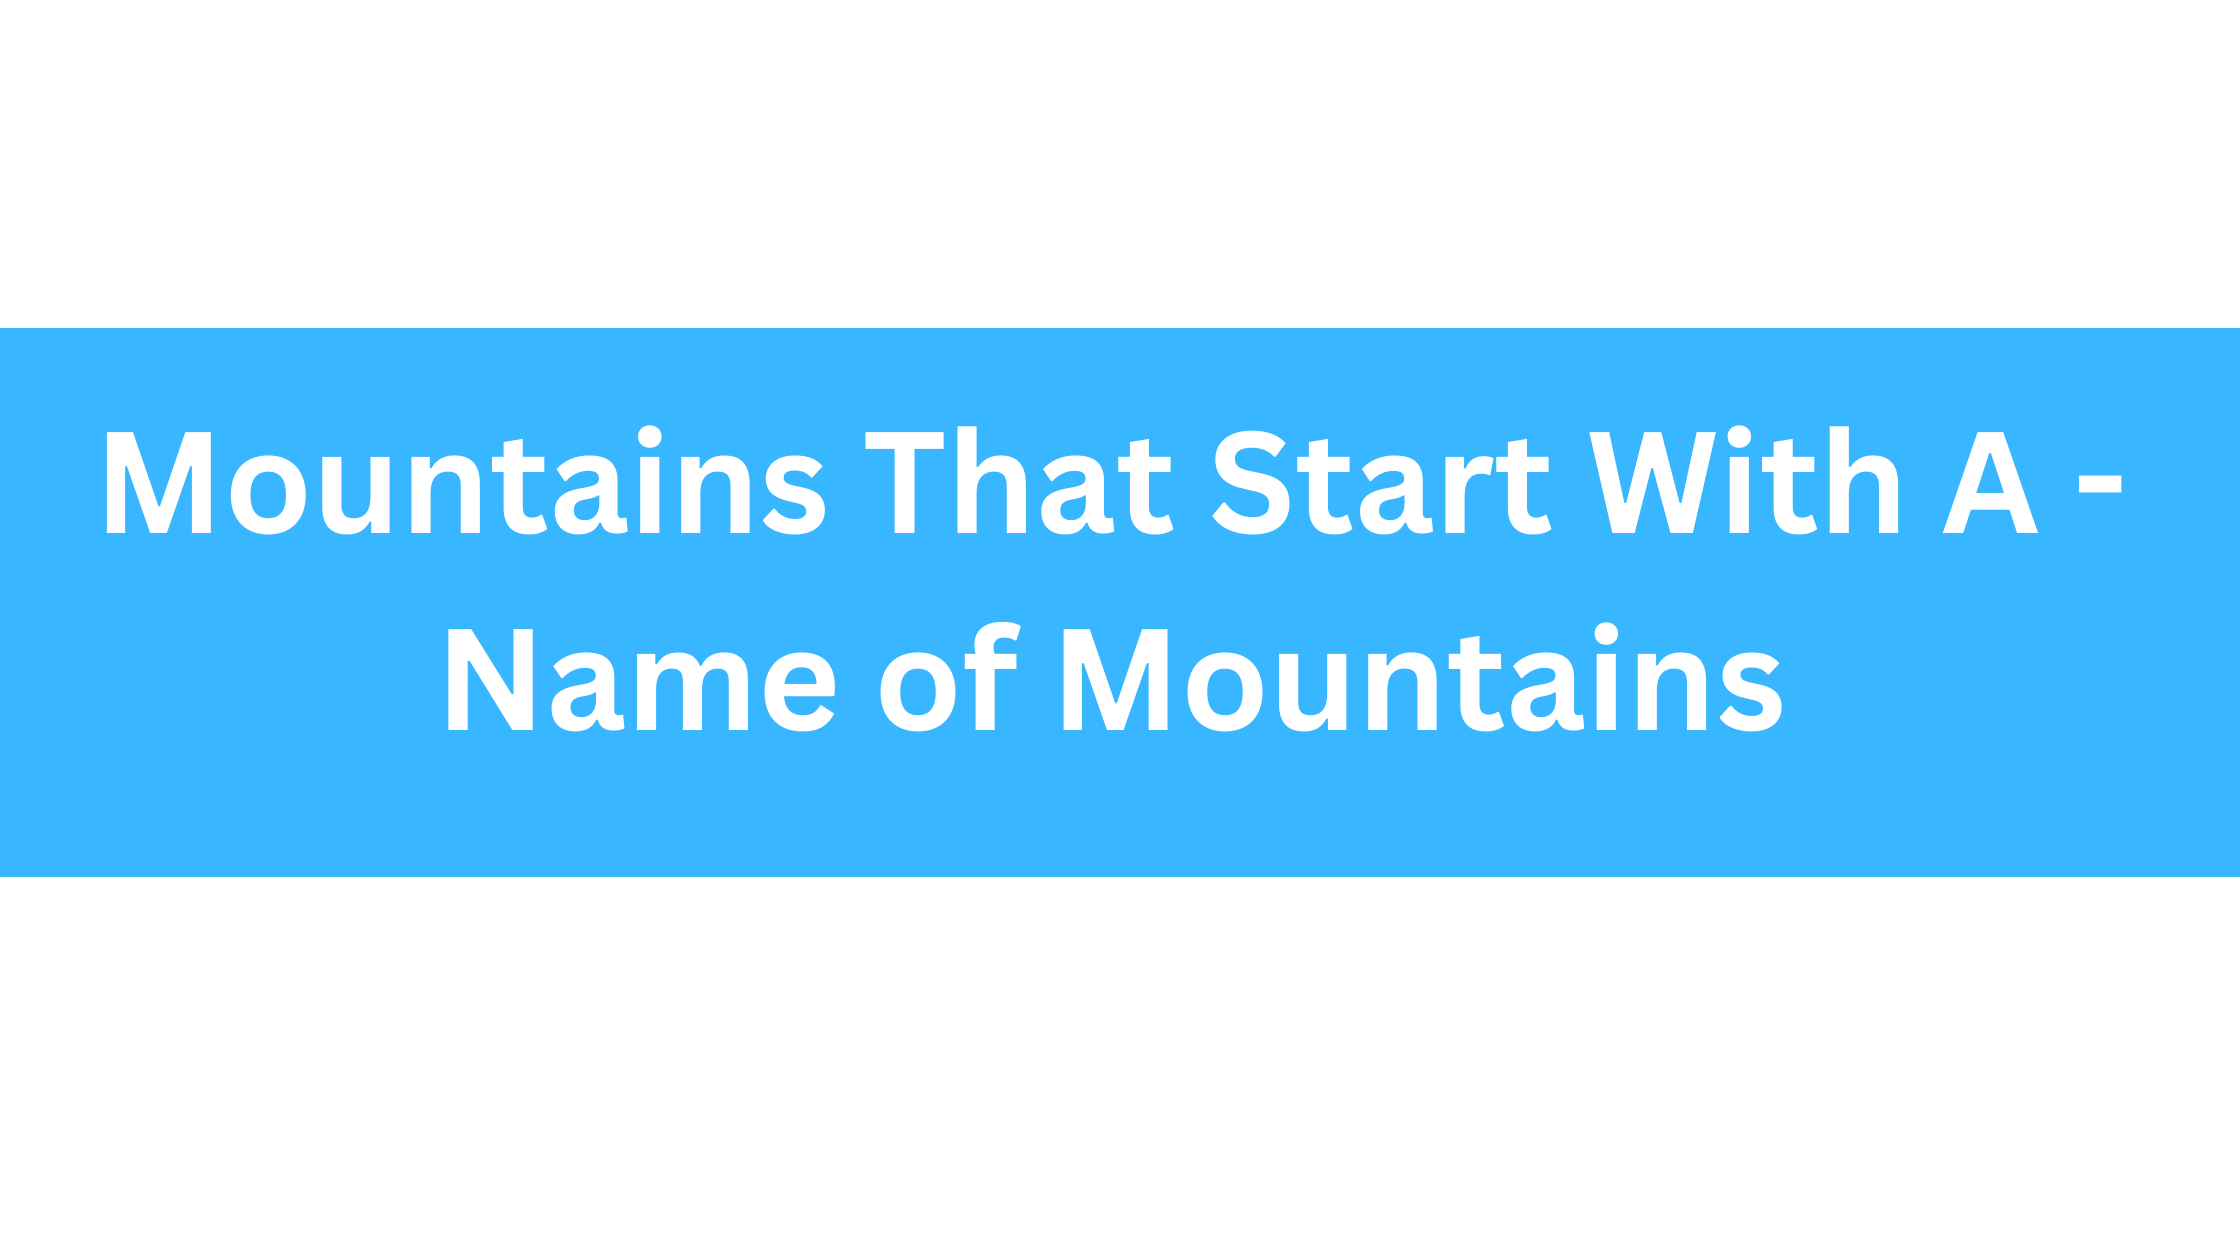 Mountains That Start With A